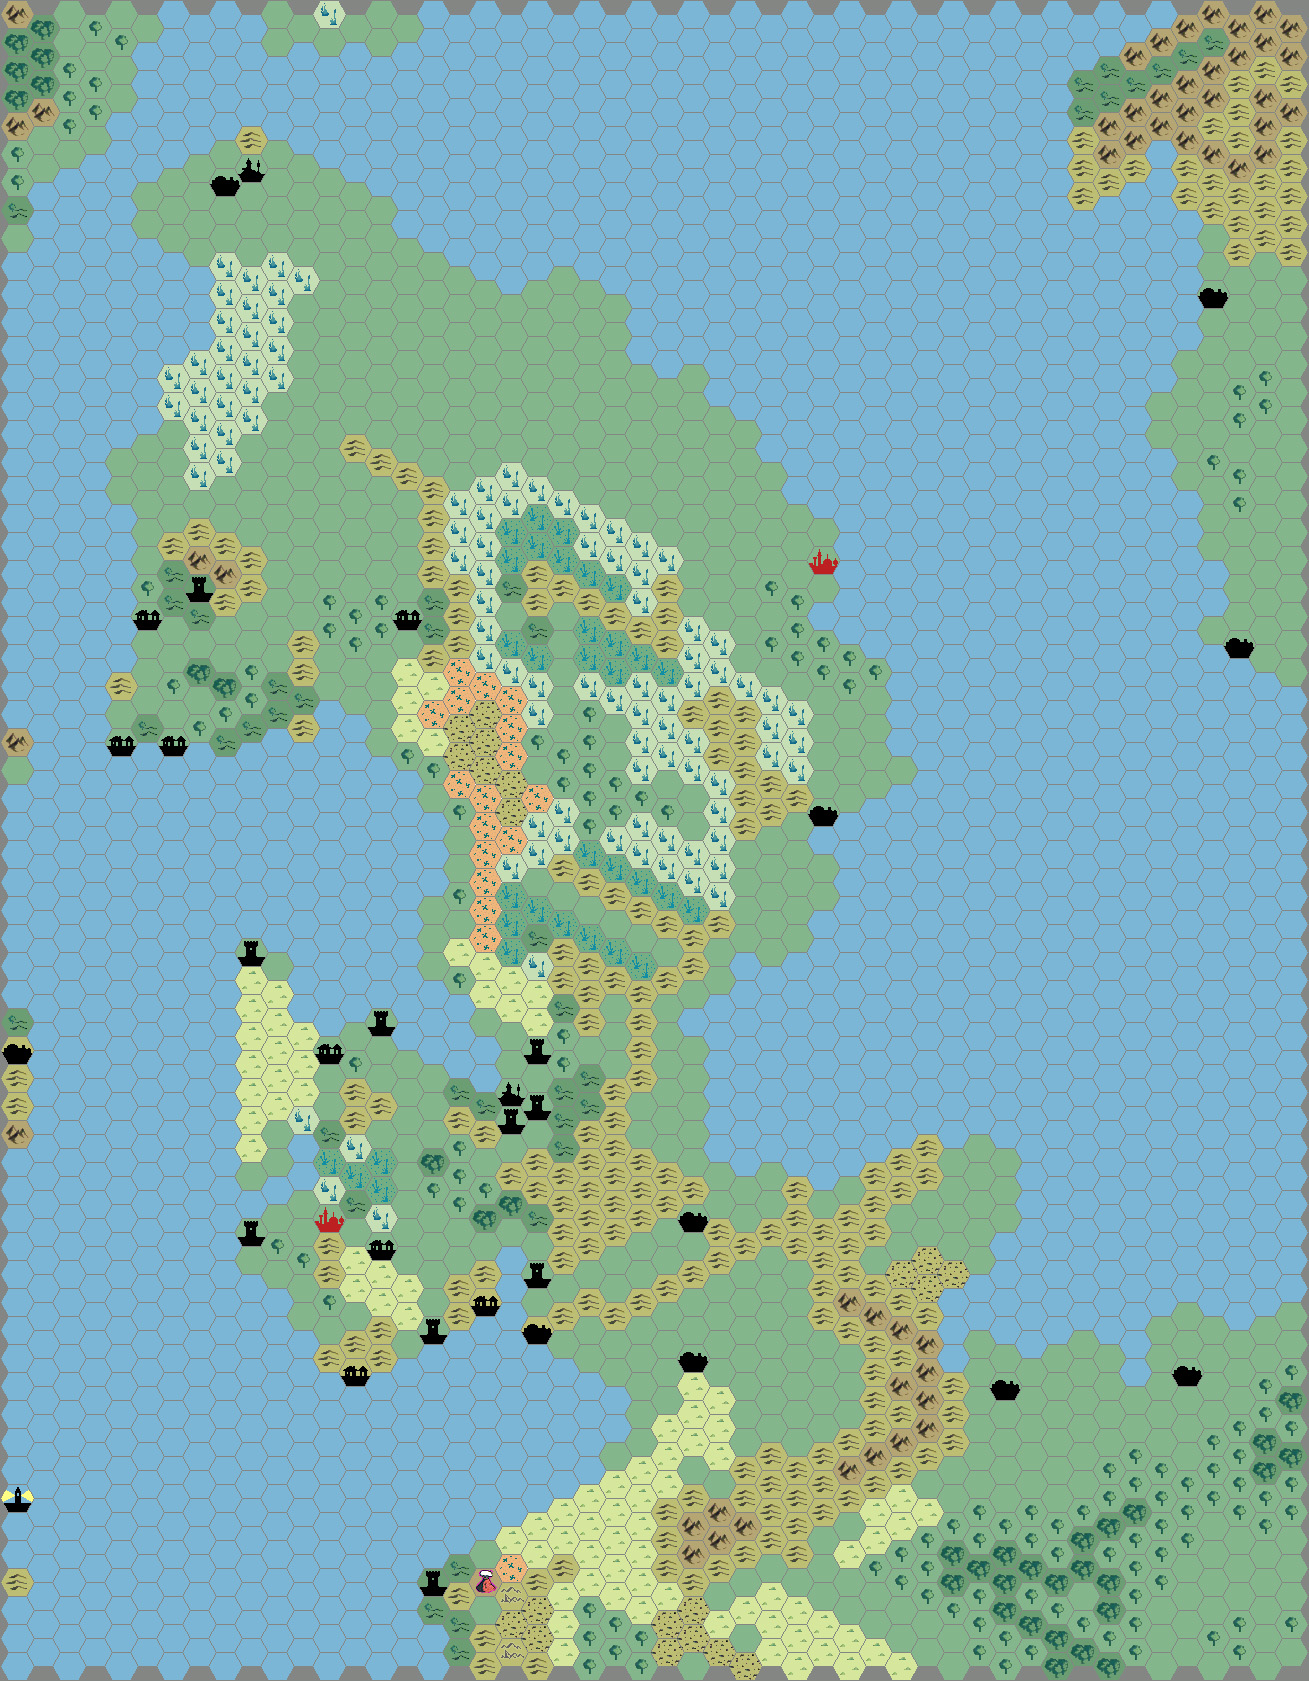 Work-in-progress map of the Isle of Dawn North, 24 miles per hex by Thibault Sarlat, December 2002